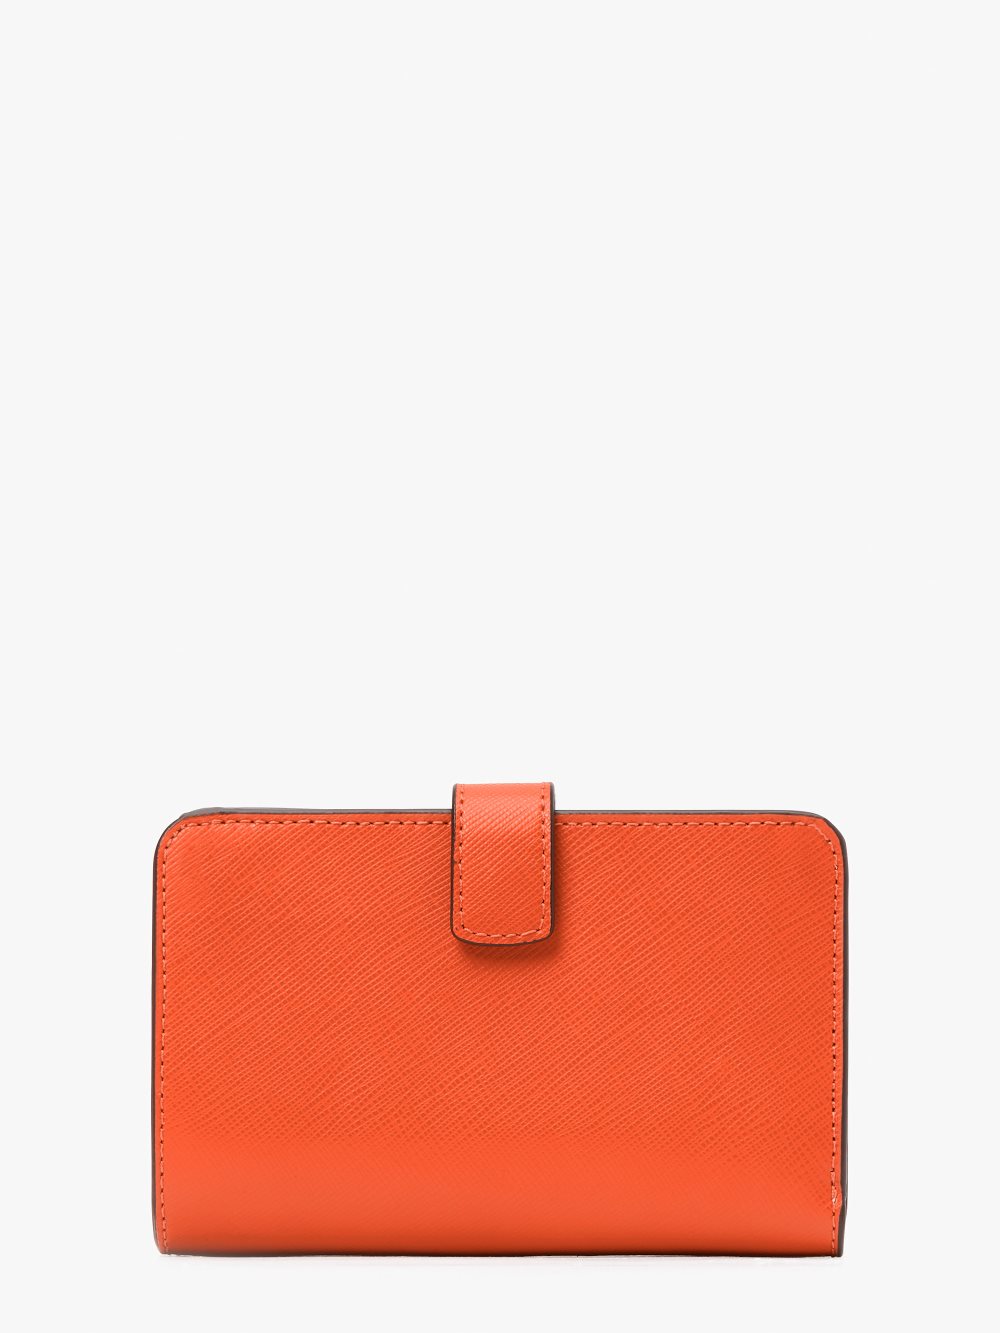 Women's dried apricot spencer compact wallet | Kate Spade